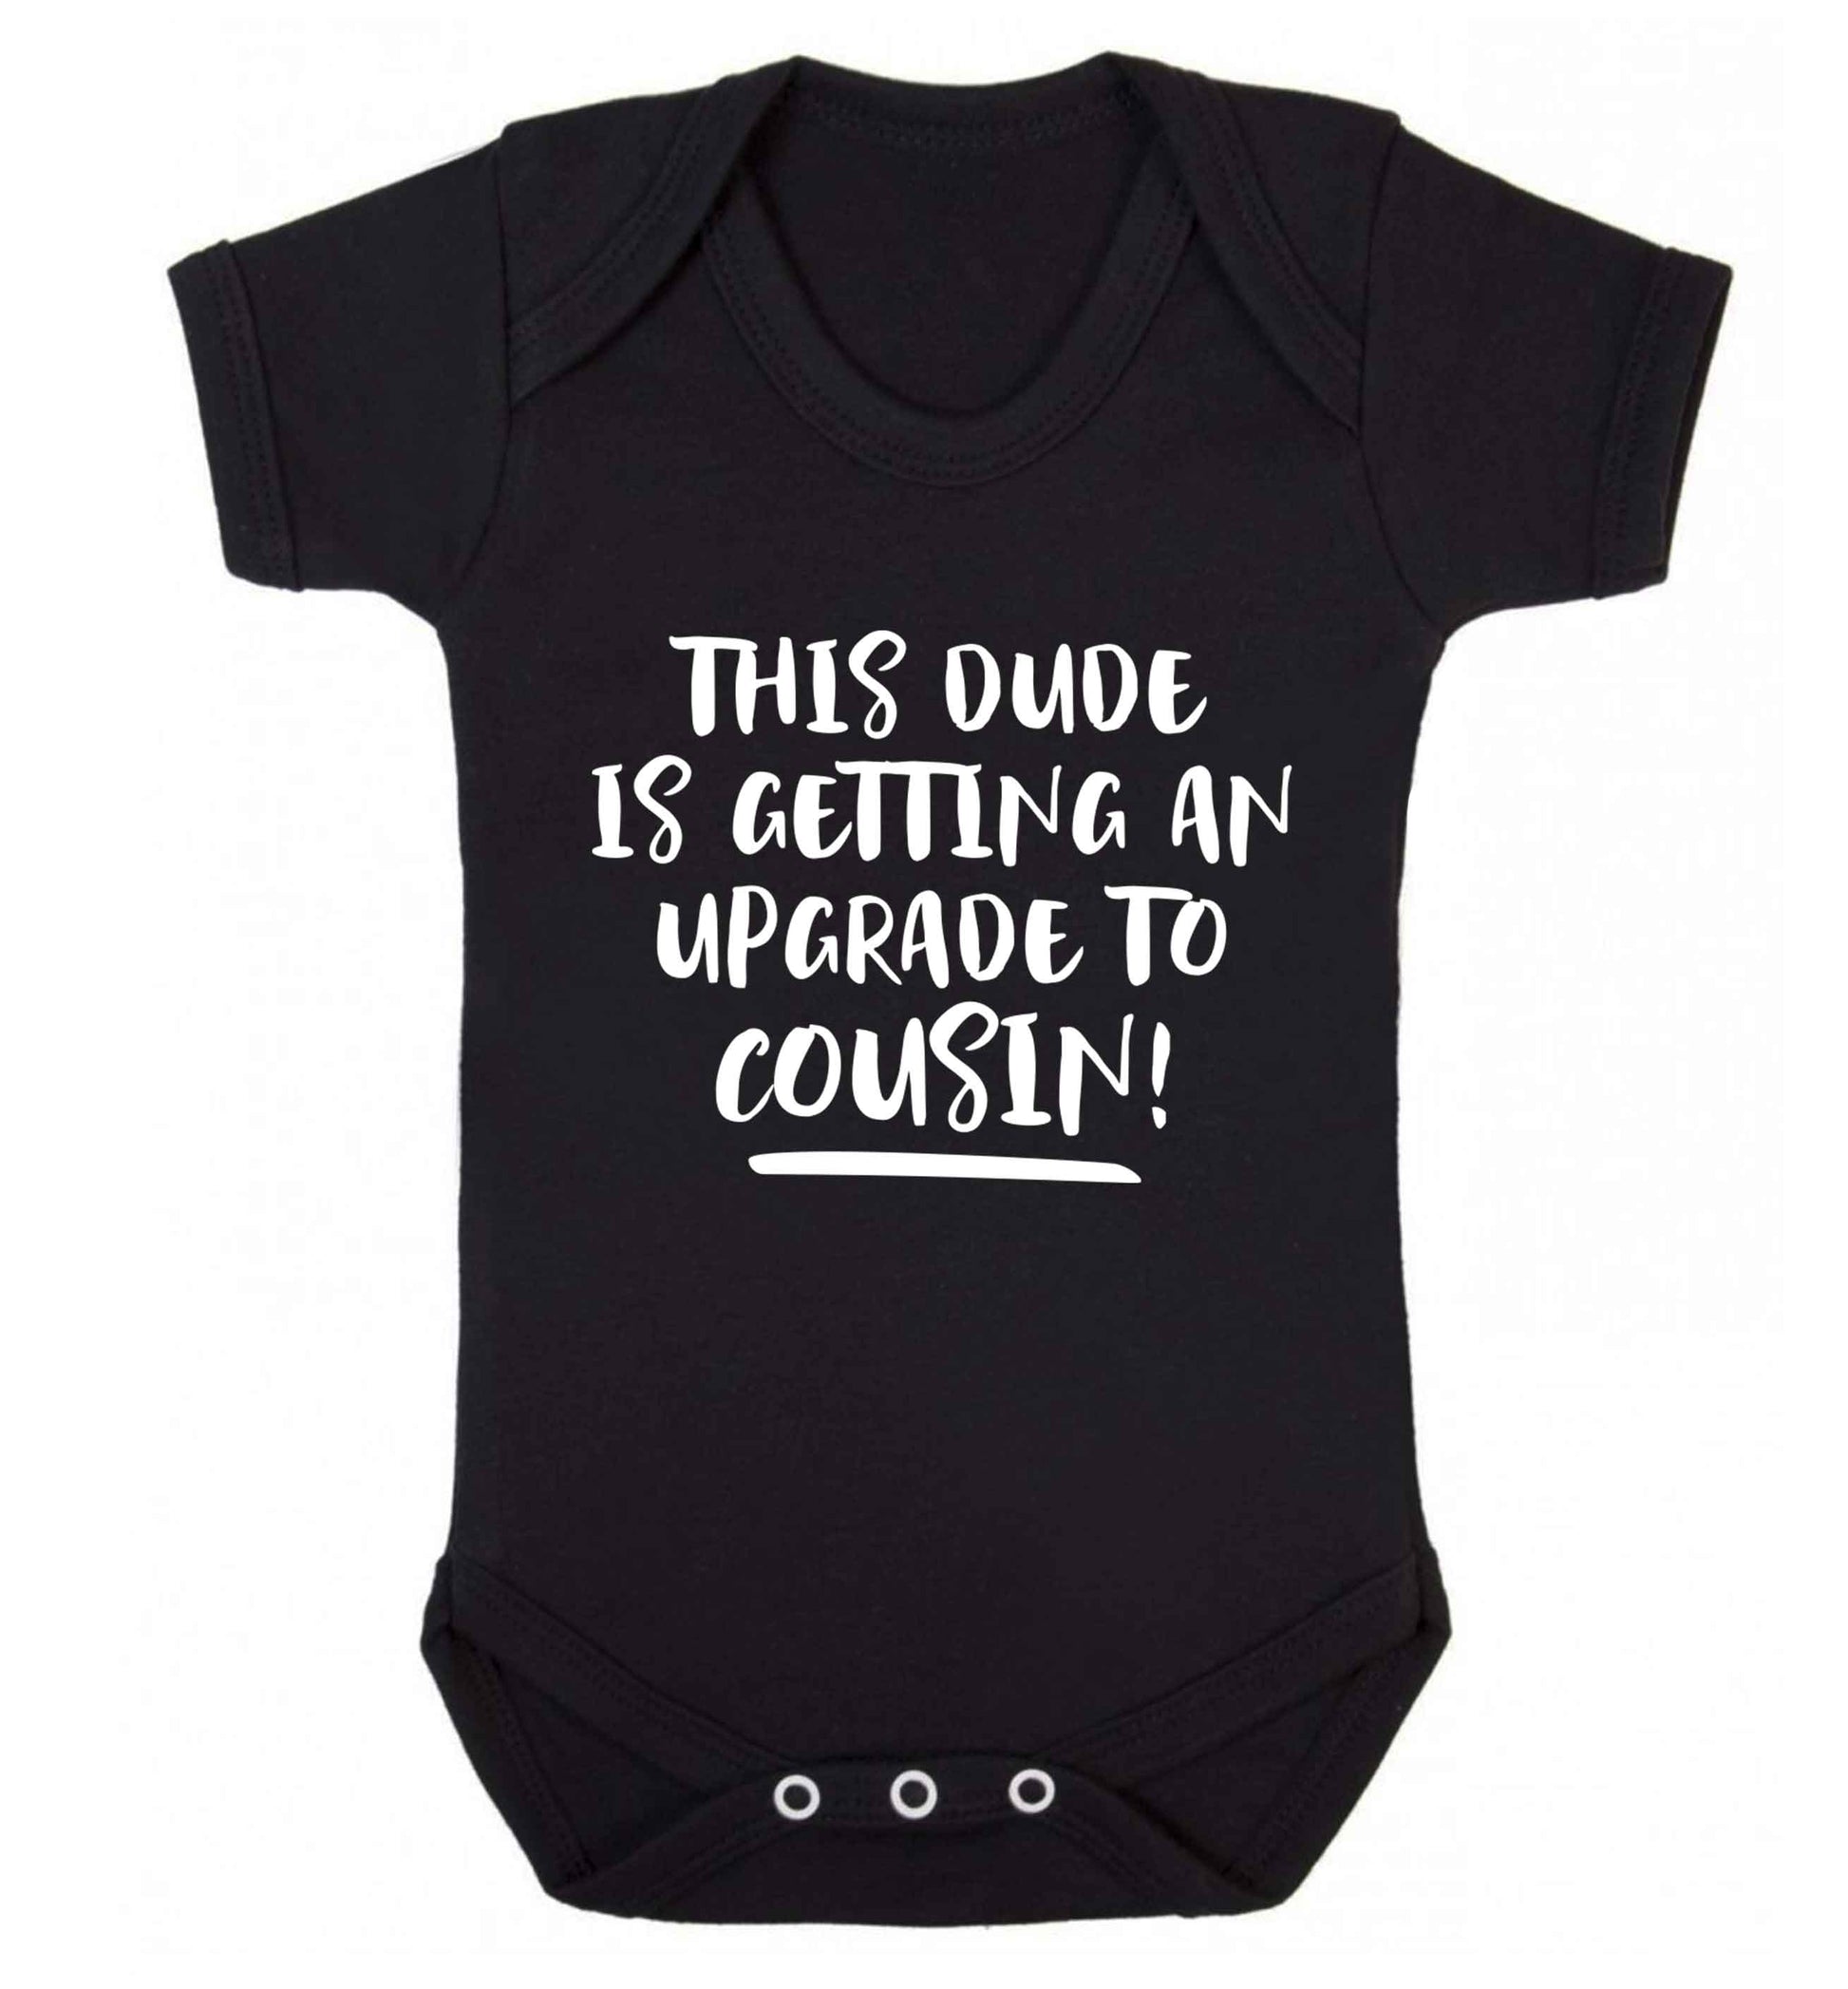 This dude is getting an upgrade to cousin! Baby Vest black 18-24 months